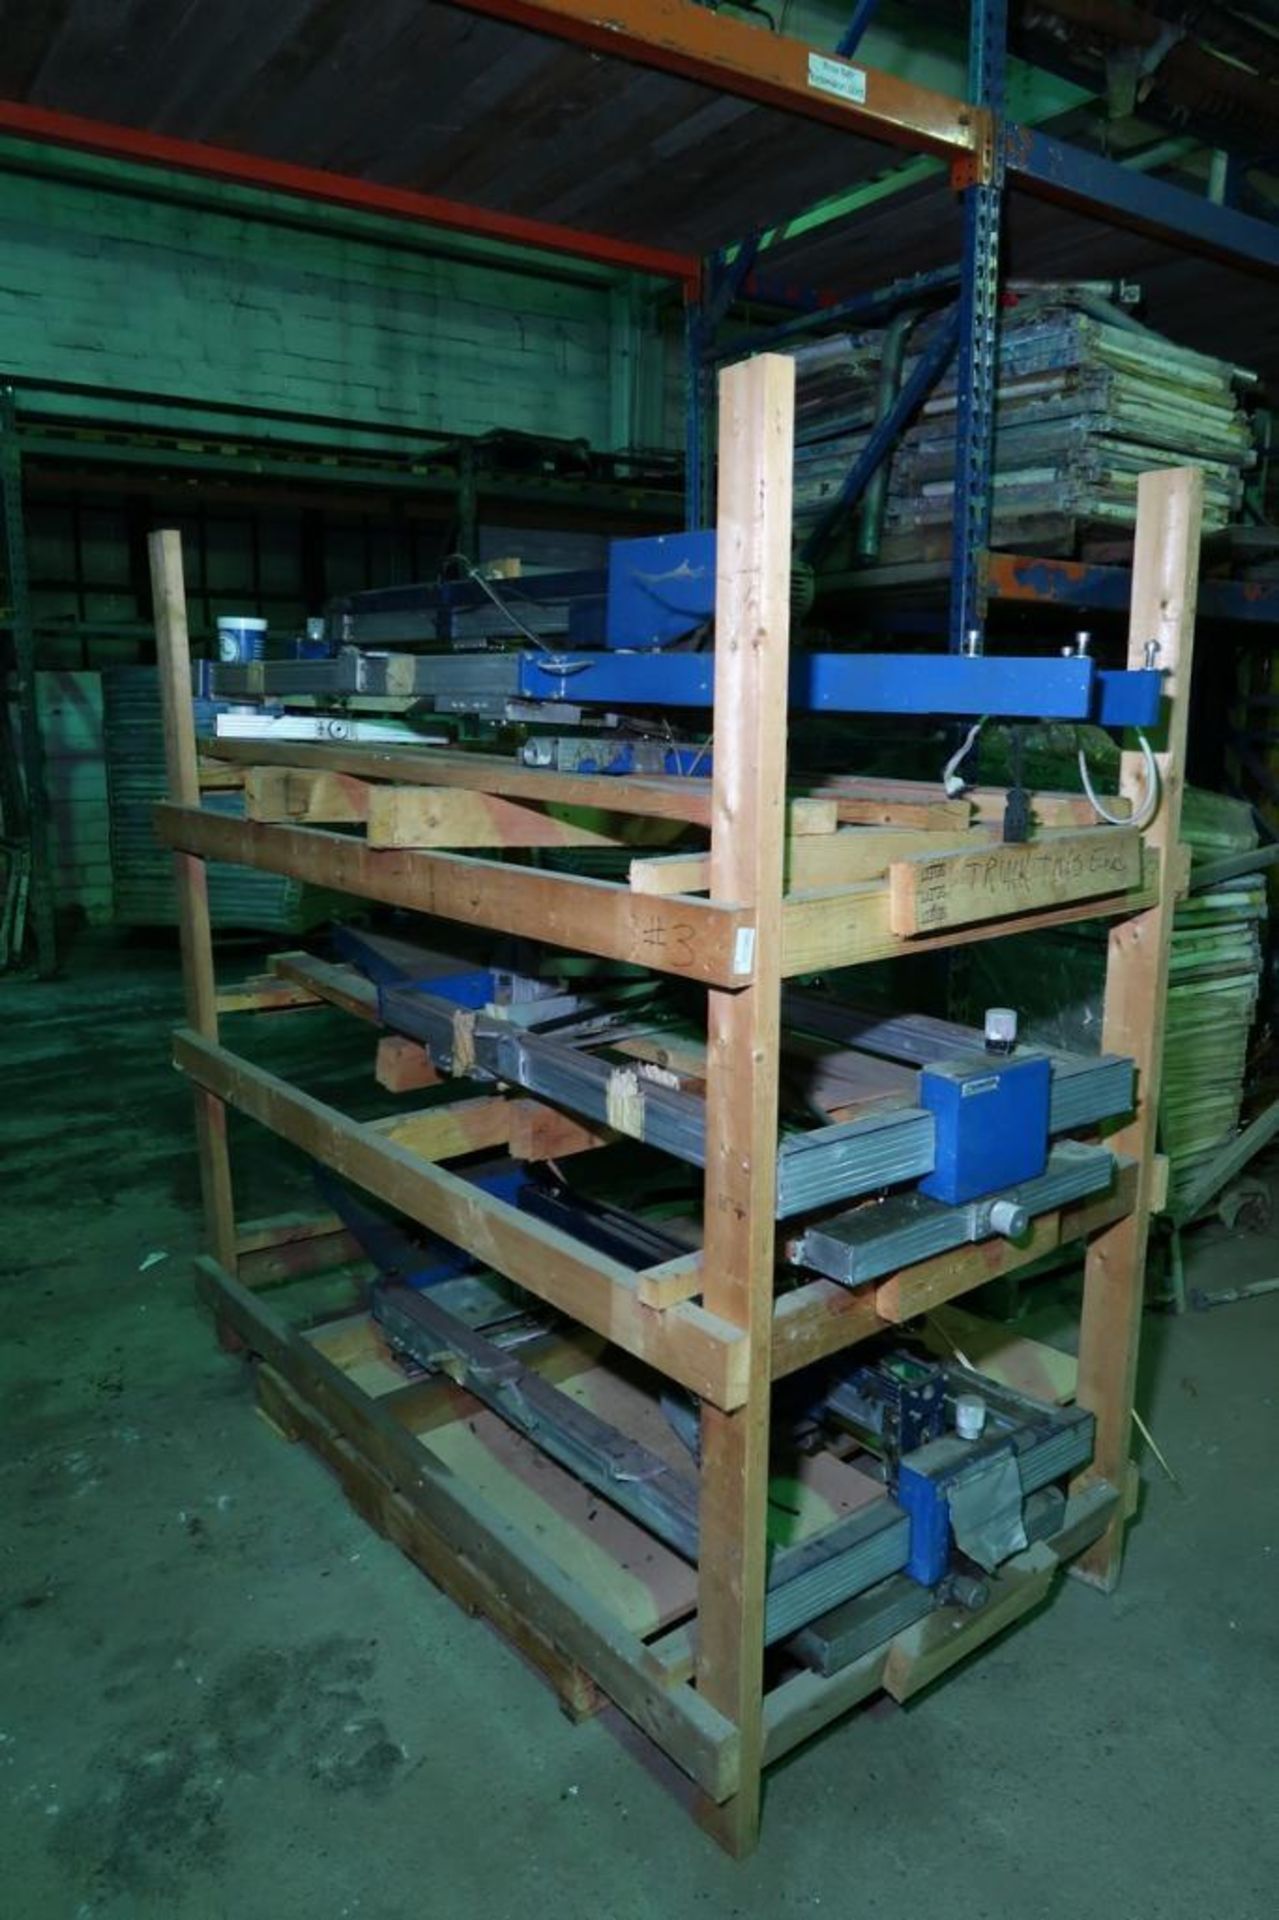 Contents of Maintenance Shop Storage Area - Image 18 of 38